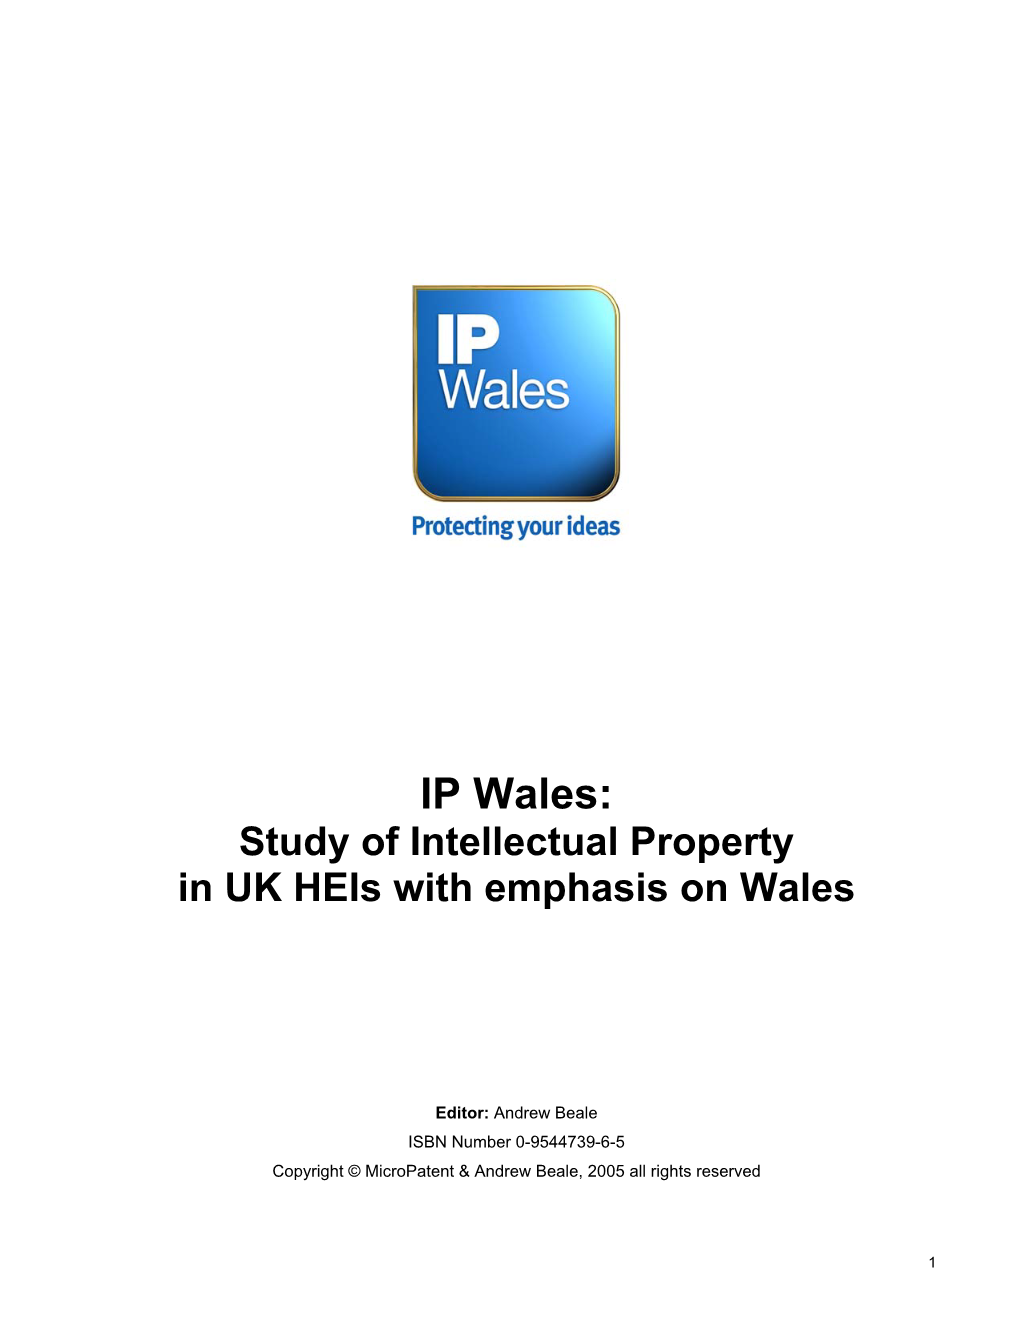 IP Wales: Study of Intellectual Property in UK Heis with Emphasis on Wales